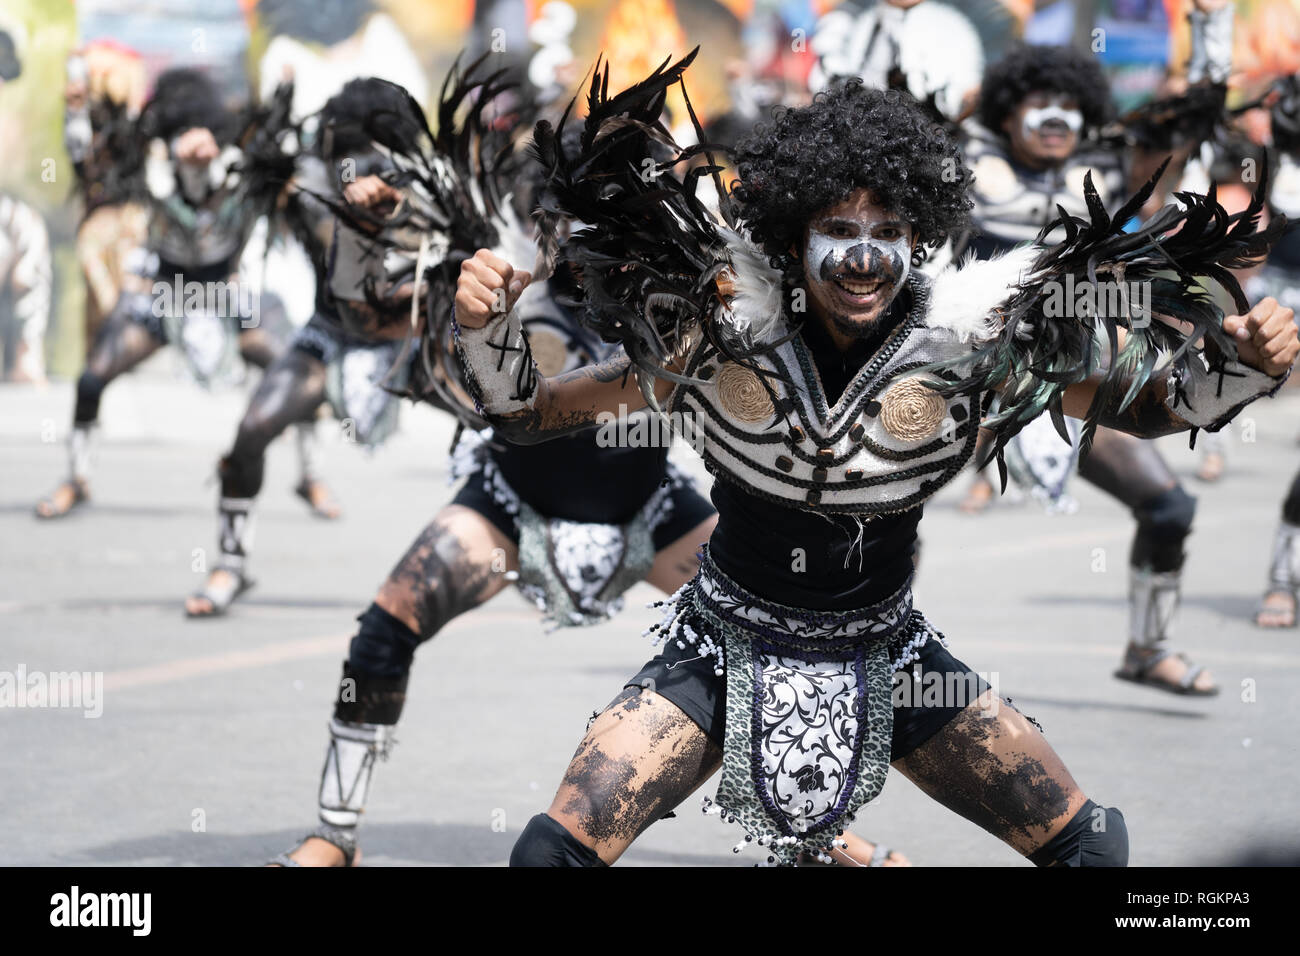 27/01/2019 Iloilo City,Philippines.The culmination of Dinagyang,one of the most vibrant annual street dancing festivals in the Philippines took place  Stock Photo